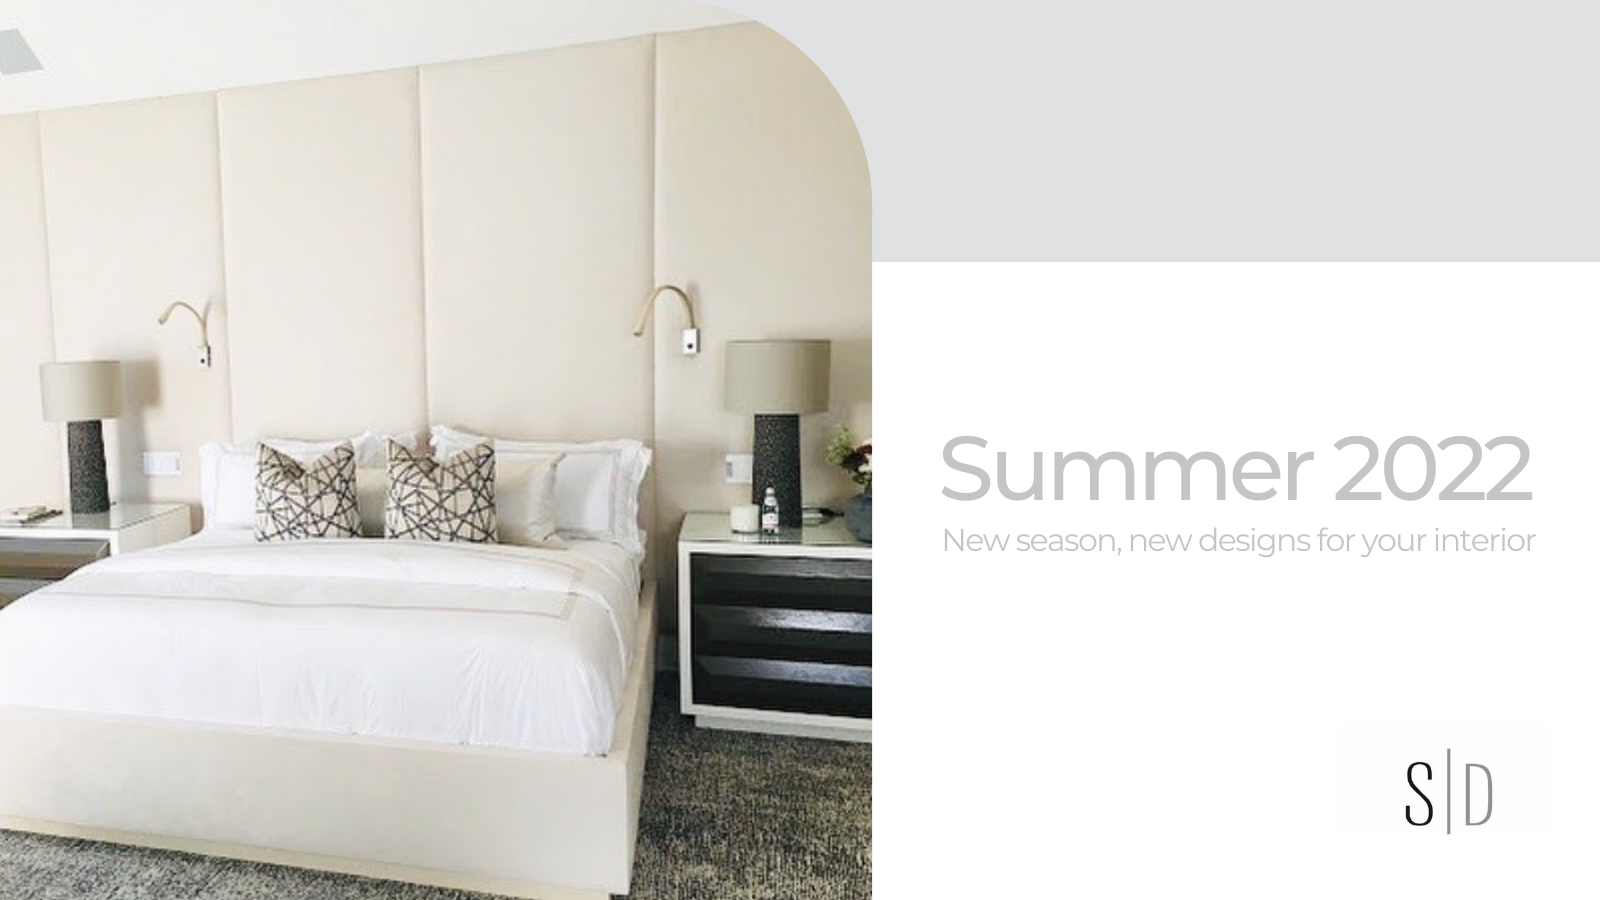 Summer 2022 – New Season, New Designs for Your Interior